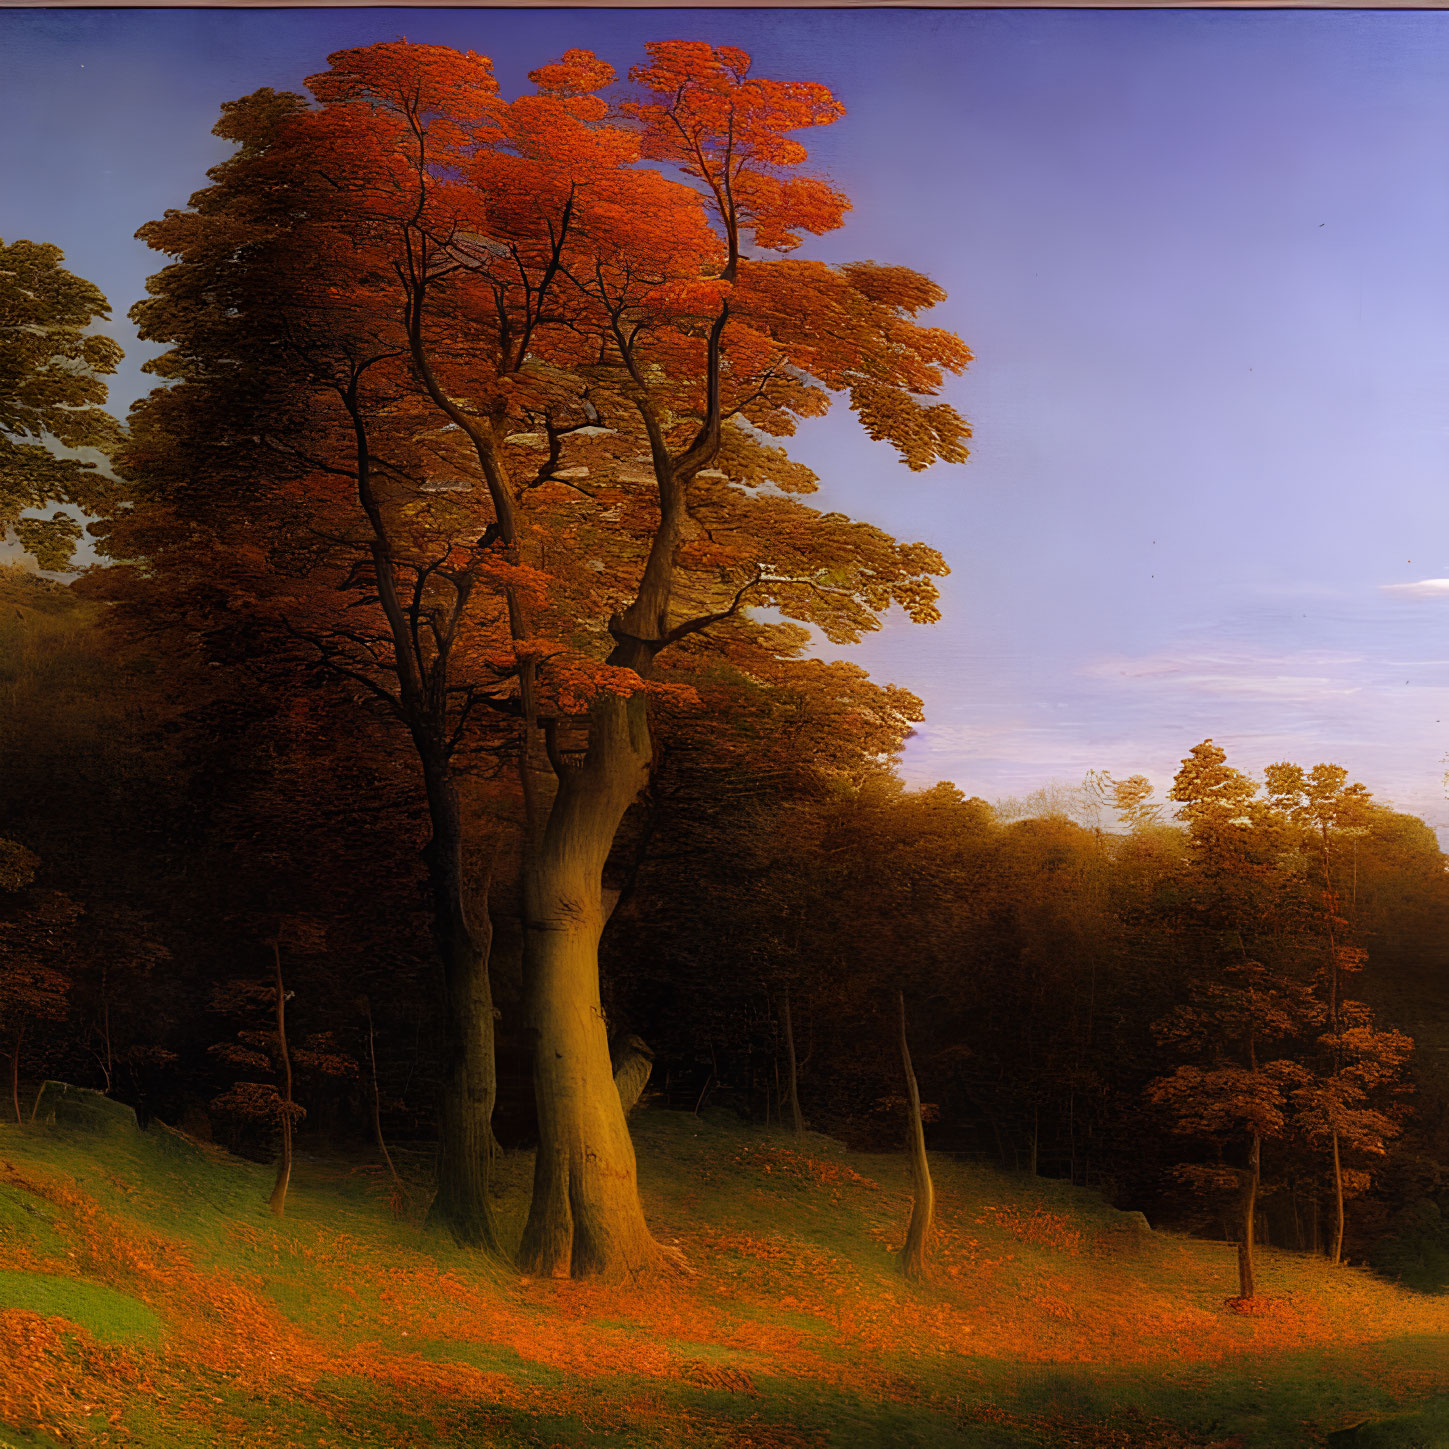 Majestic solitary tree with reddish-orange leaves at sunset